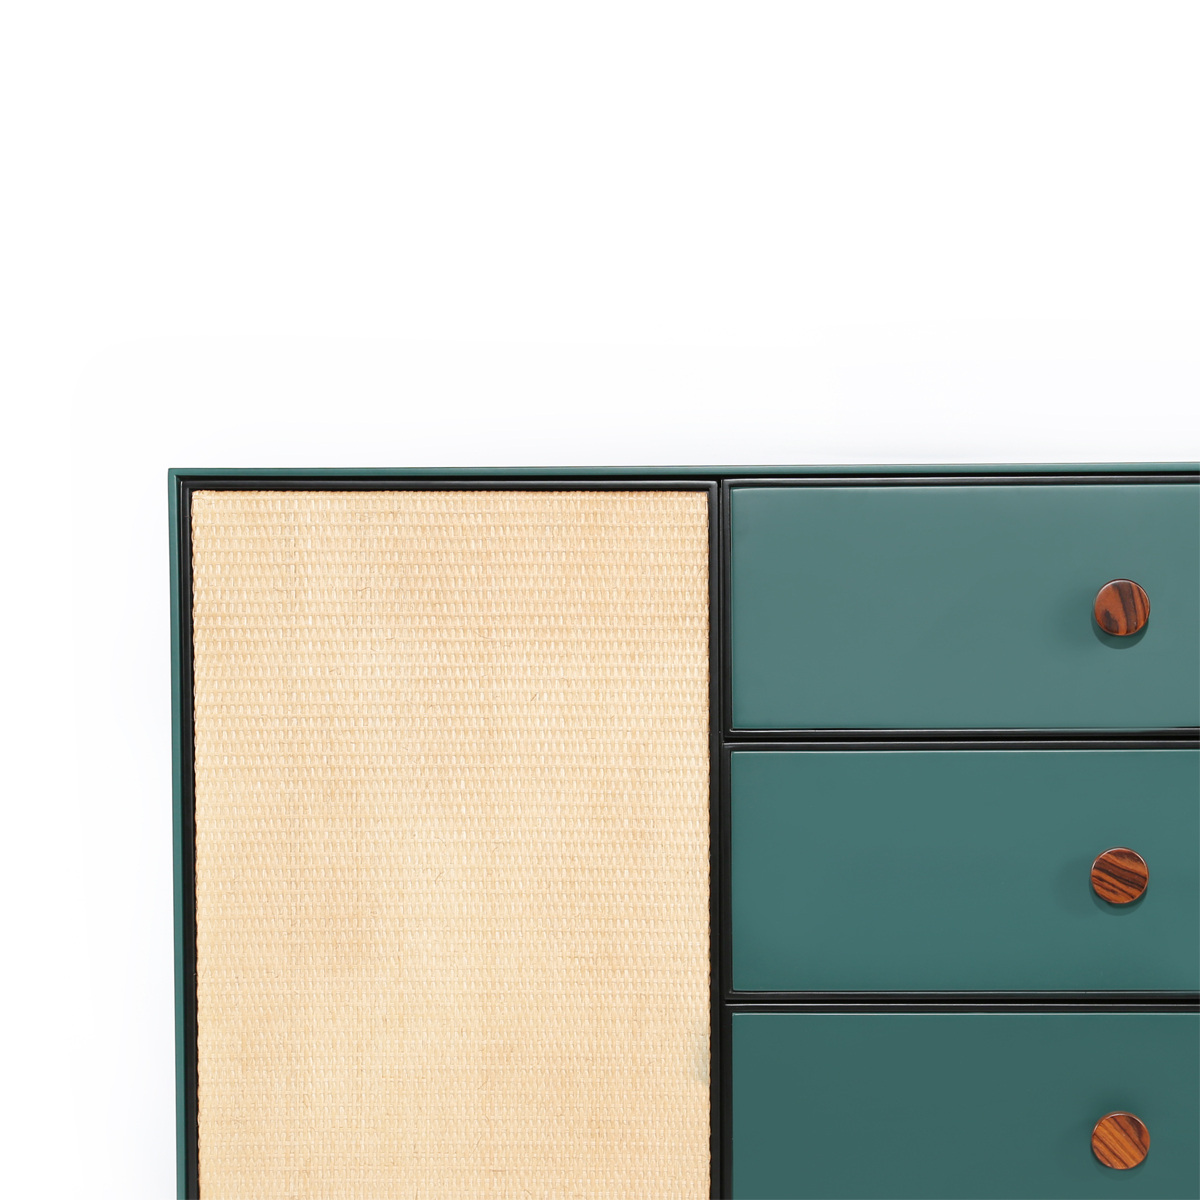 Chest of Drawers Essence, Green - L100 x W45 x H75 cm - Lacquered wood - image 2